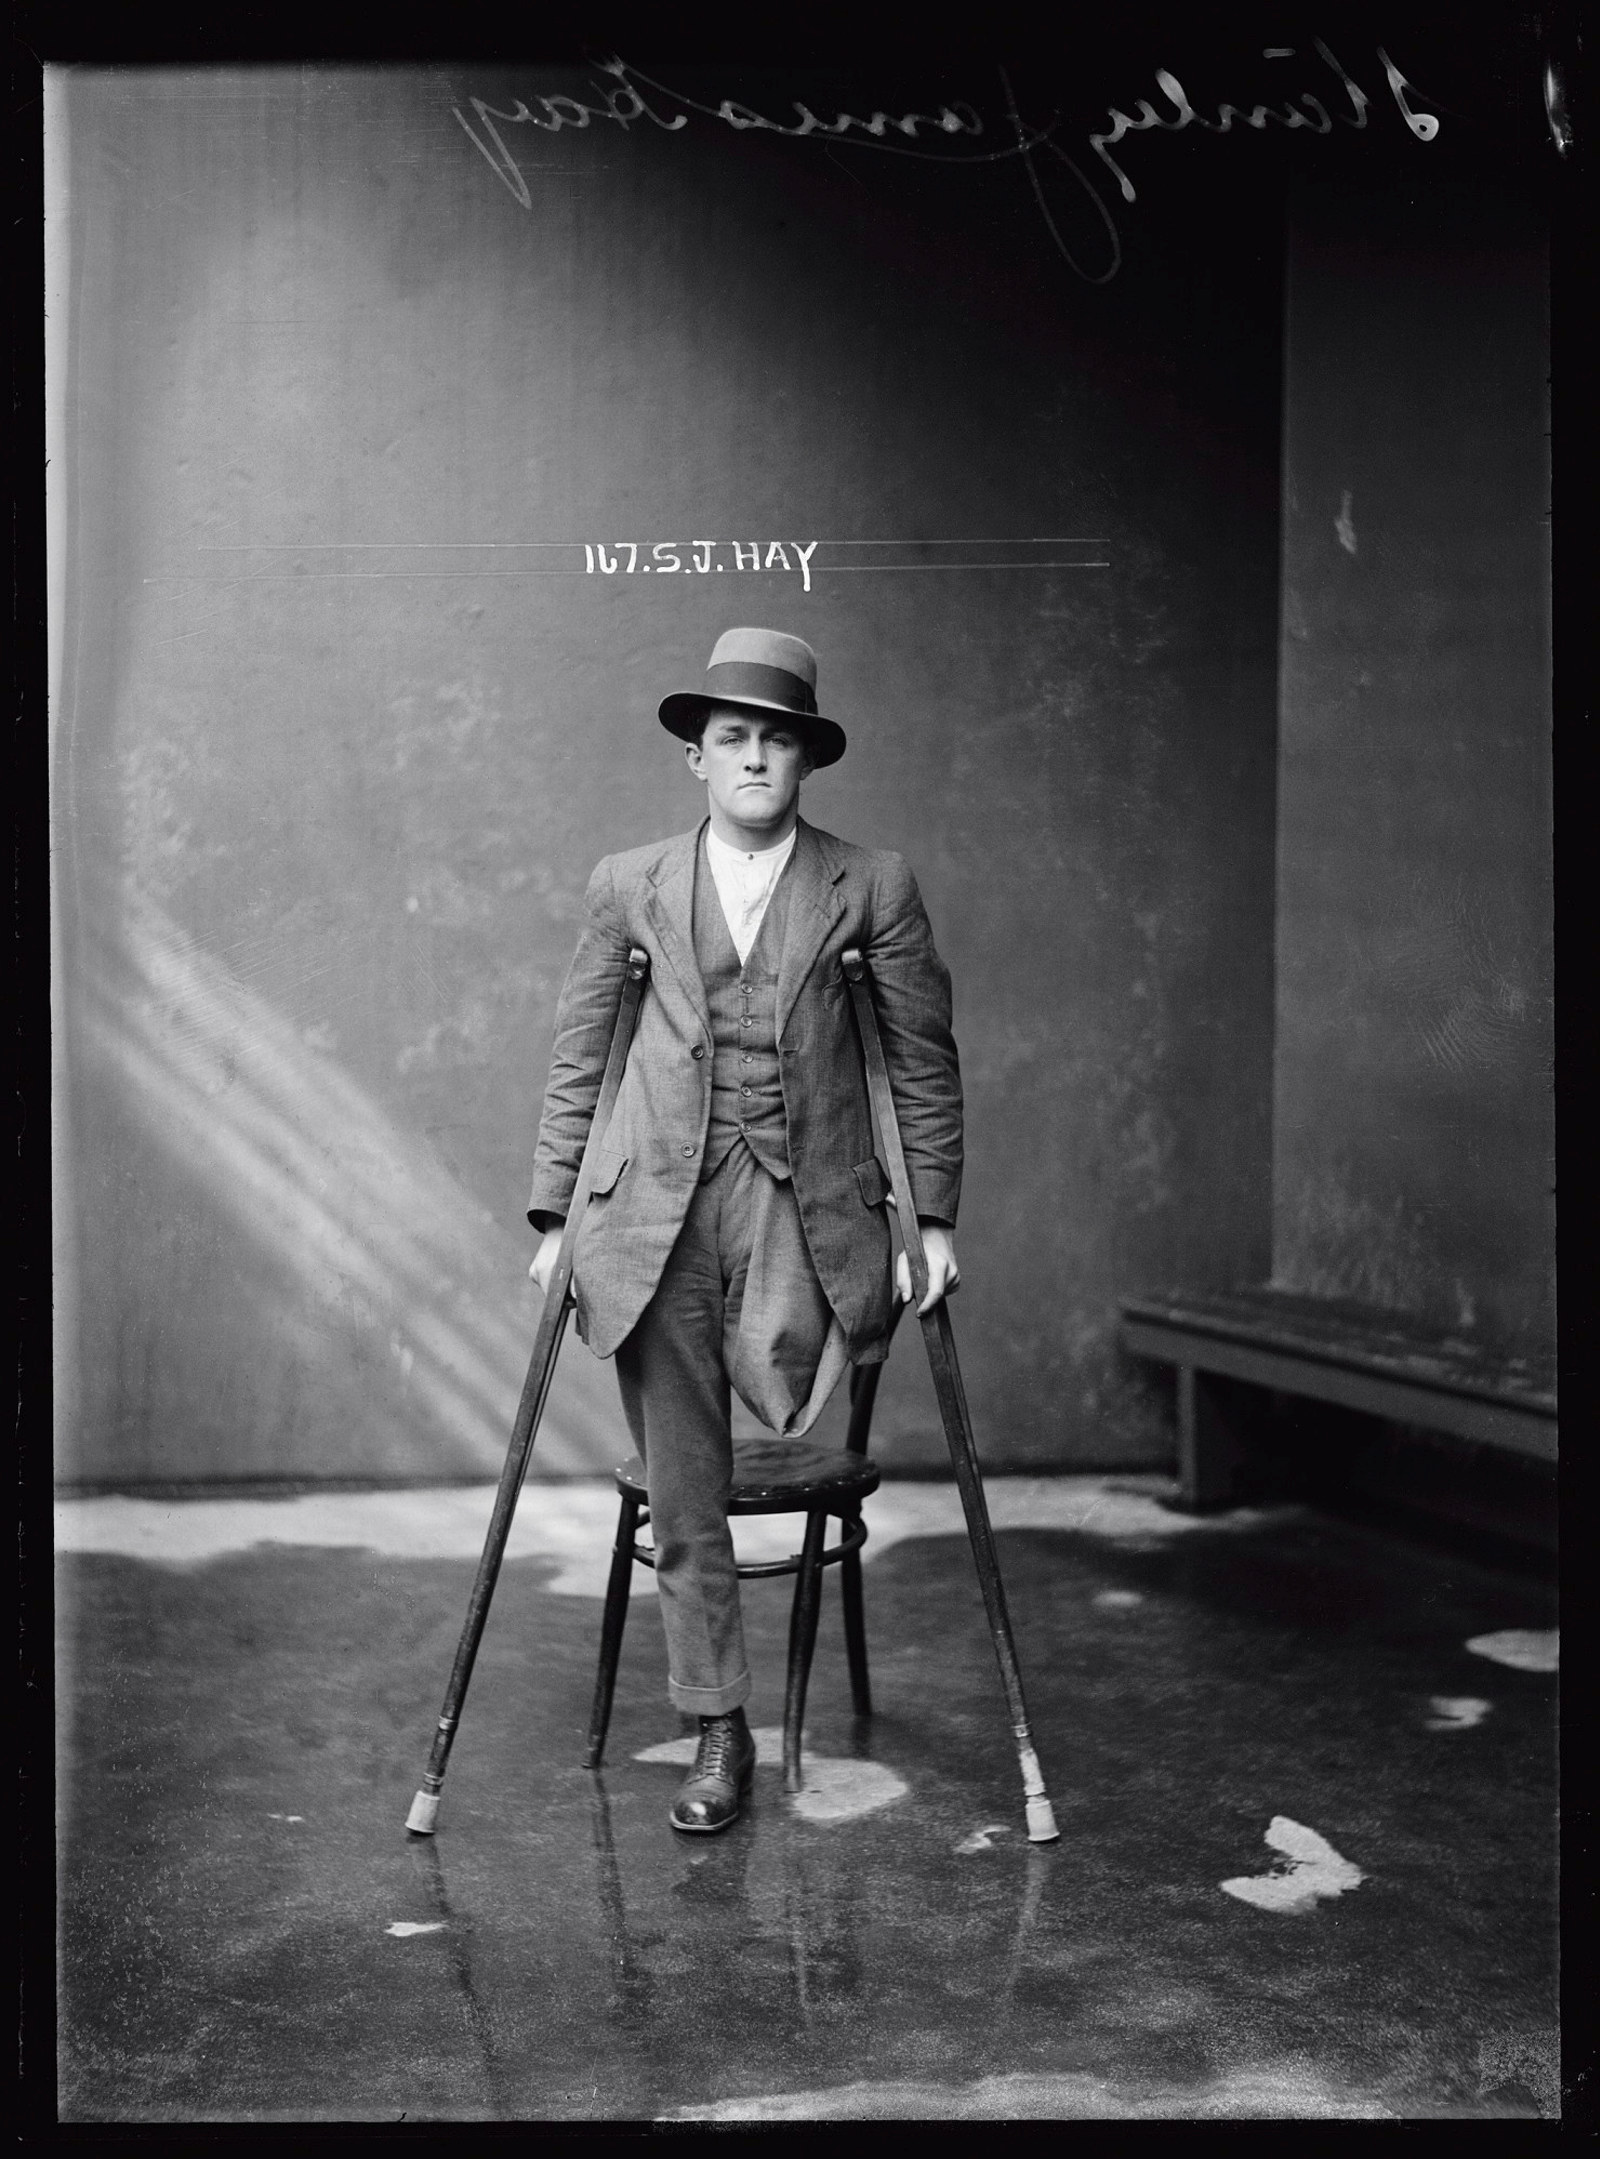 Black and white mugshot of one-legged man standing with crutches and wearing a hat.